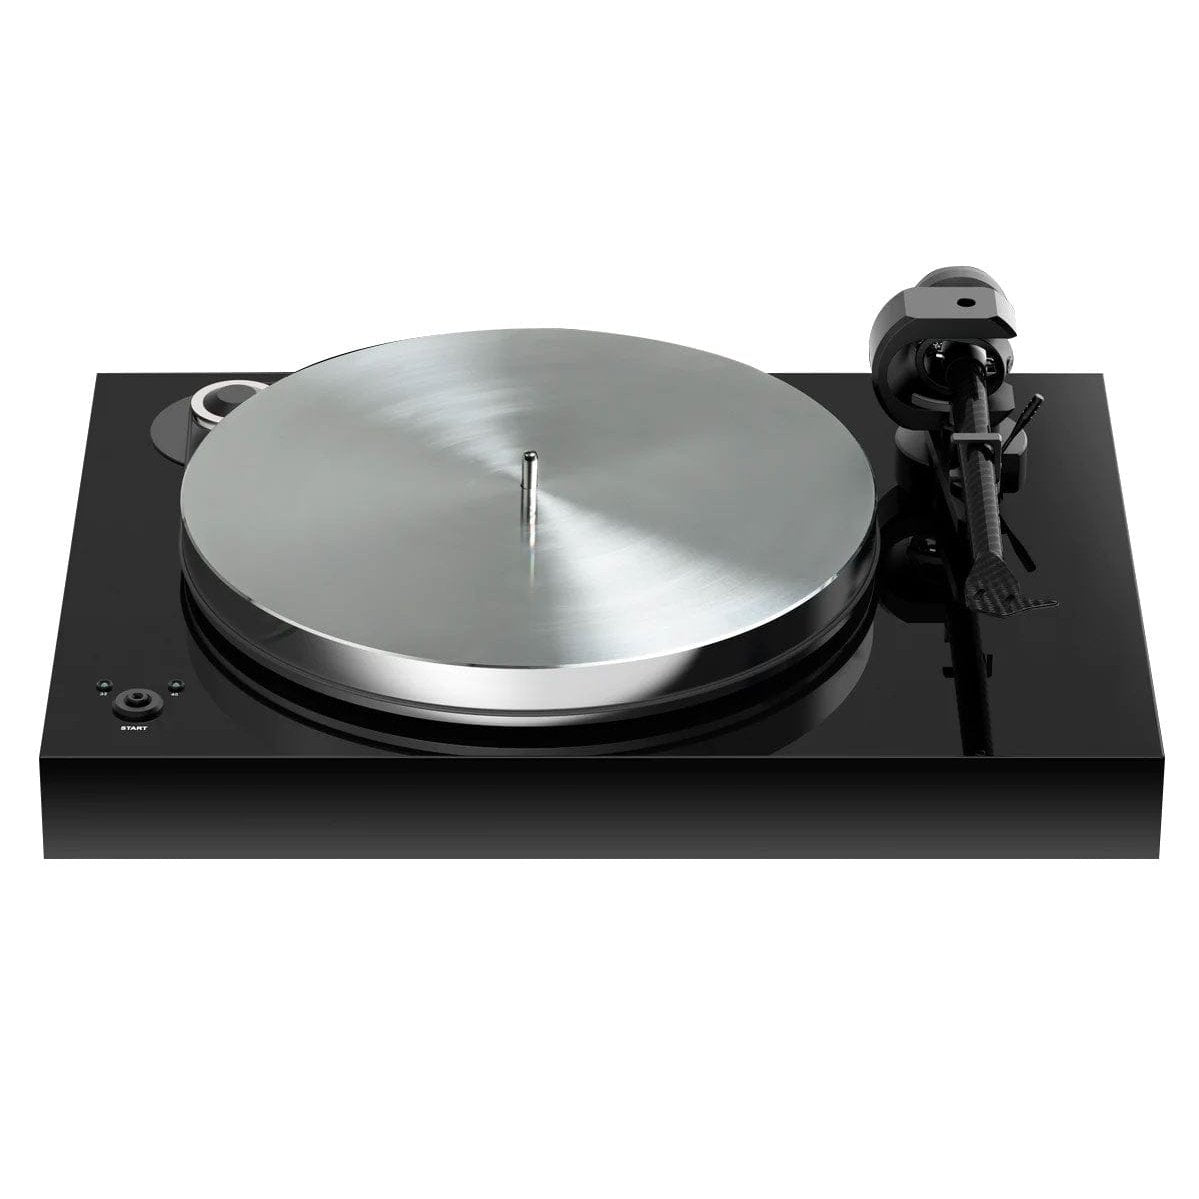 Pro-Ject X8 Evolution Turntables